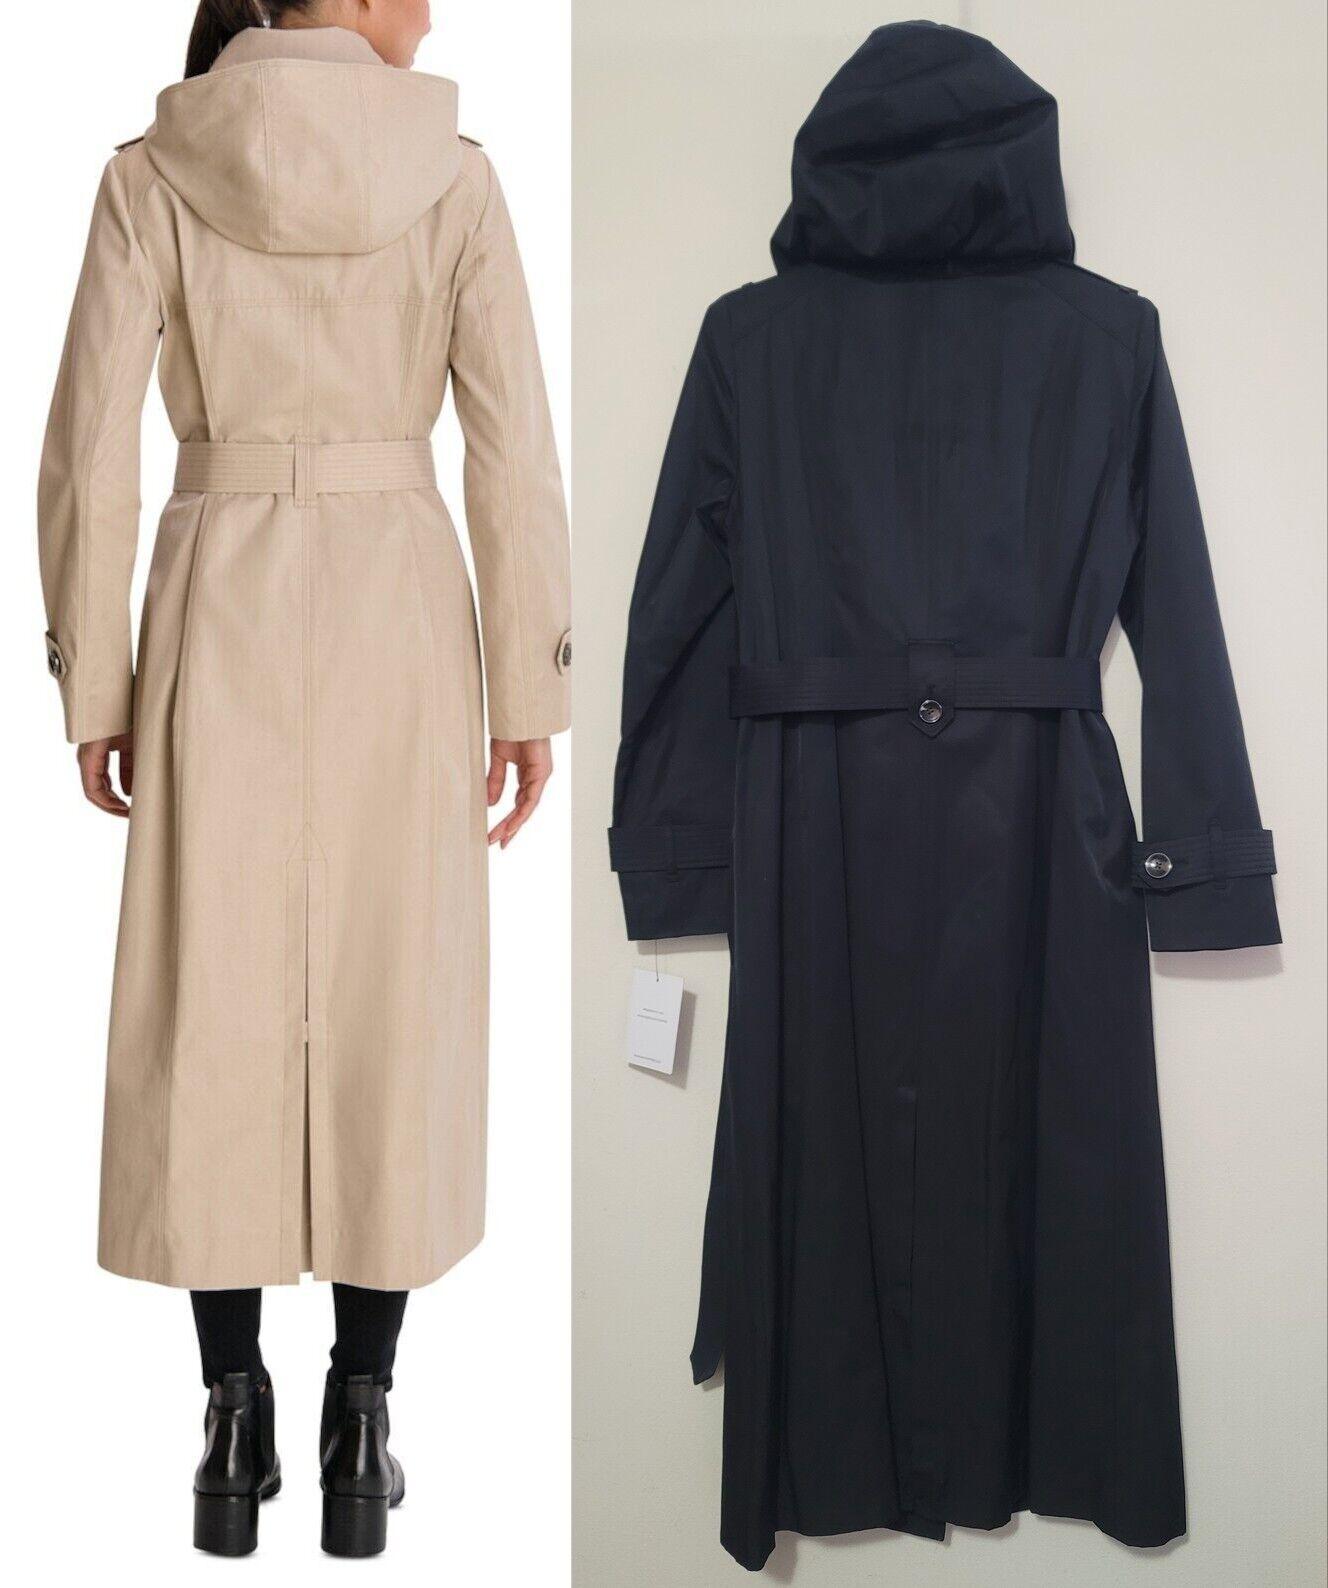 London Fog Womens Hooded Maxi 50 in. Trench Coat Black  Size XS - SVNYFancy